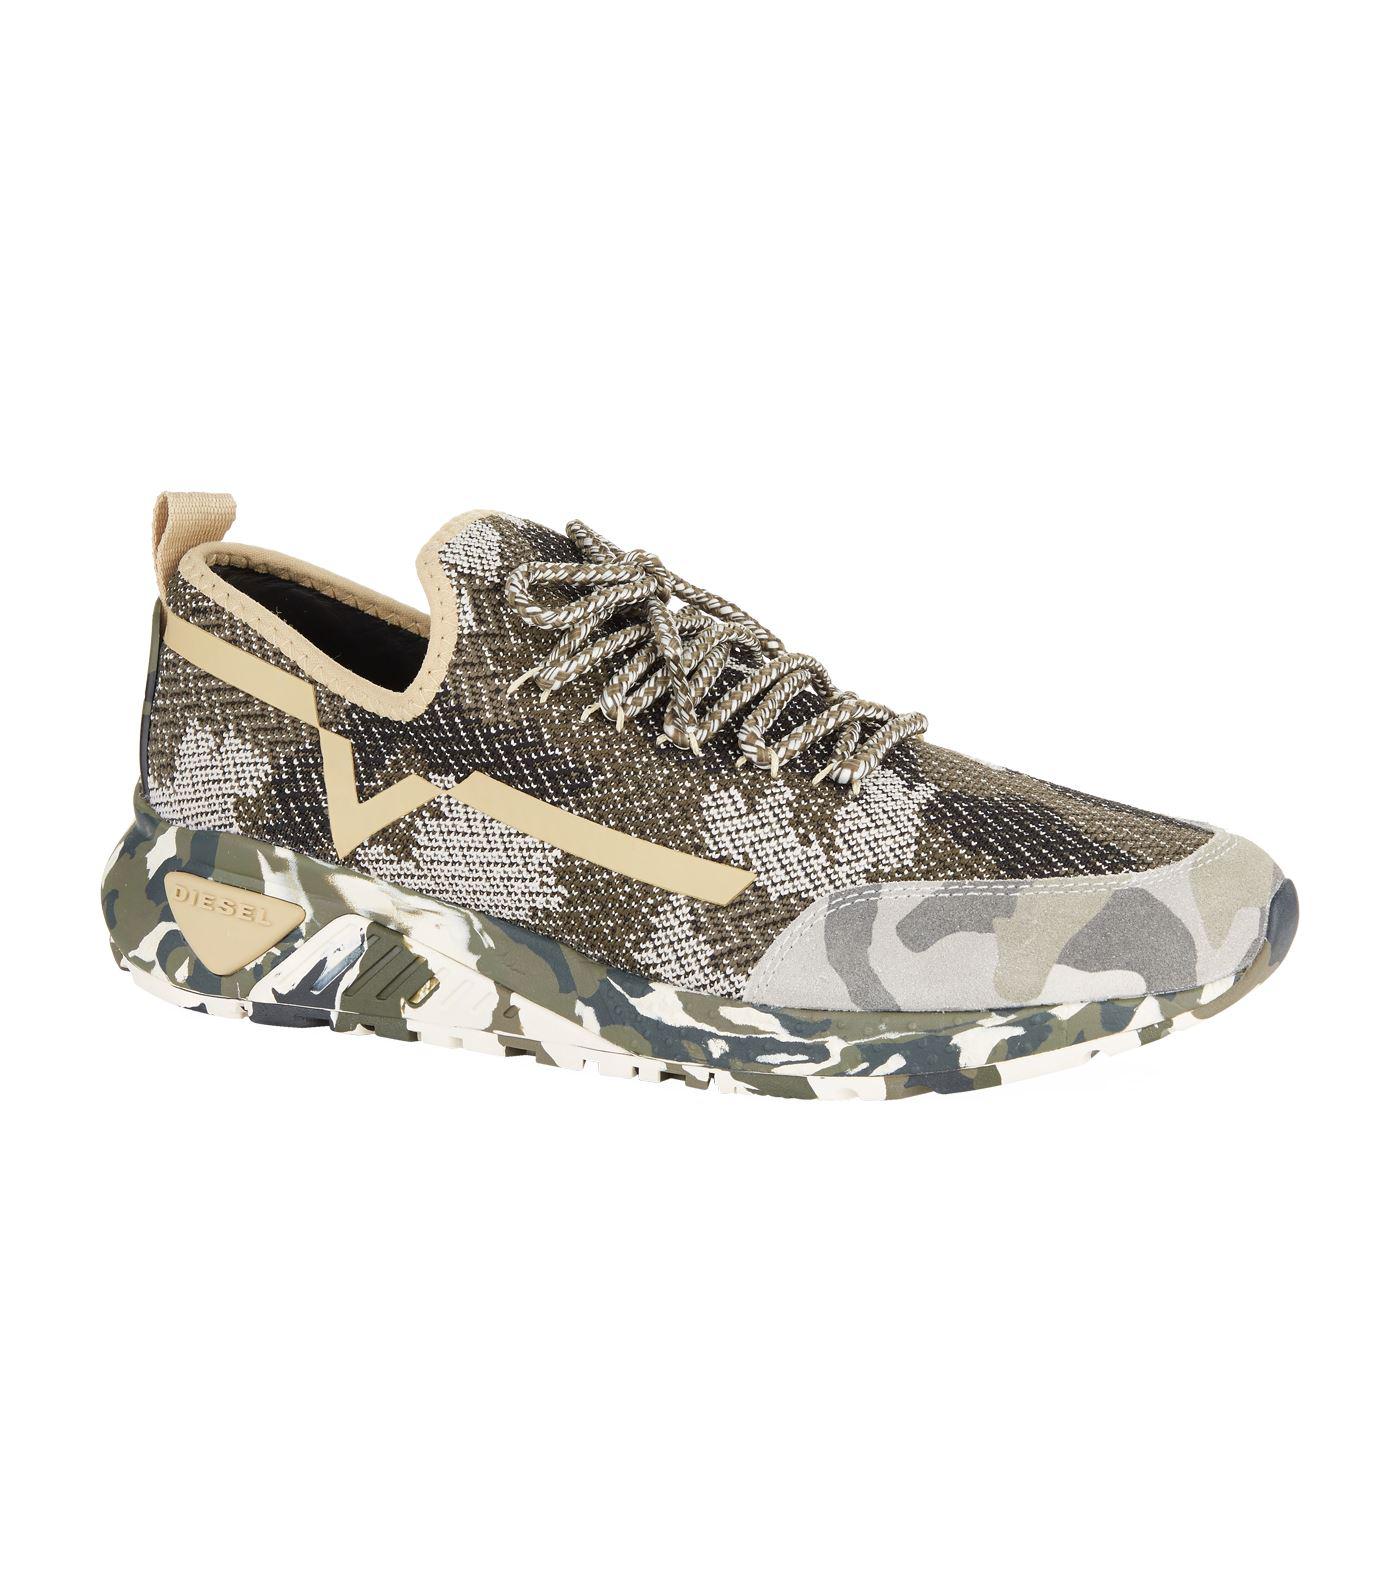 DIESEL Suede S-kby Camouflage Sneakers in Green for Men - Lyst